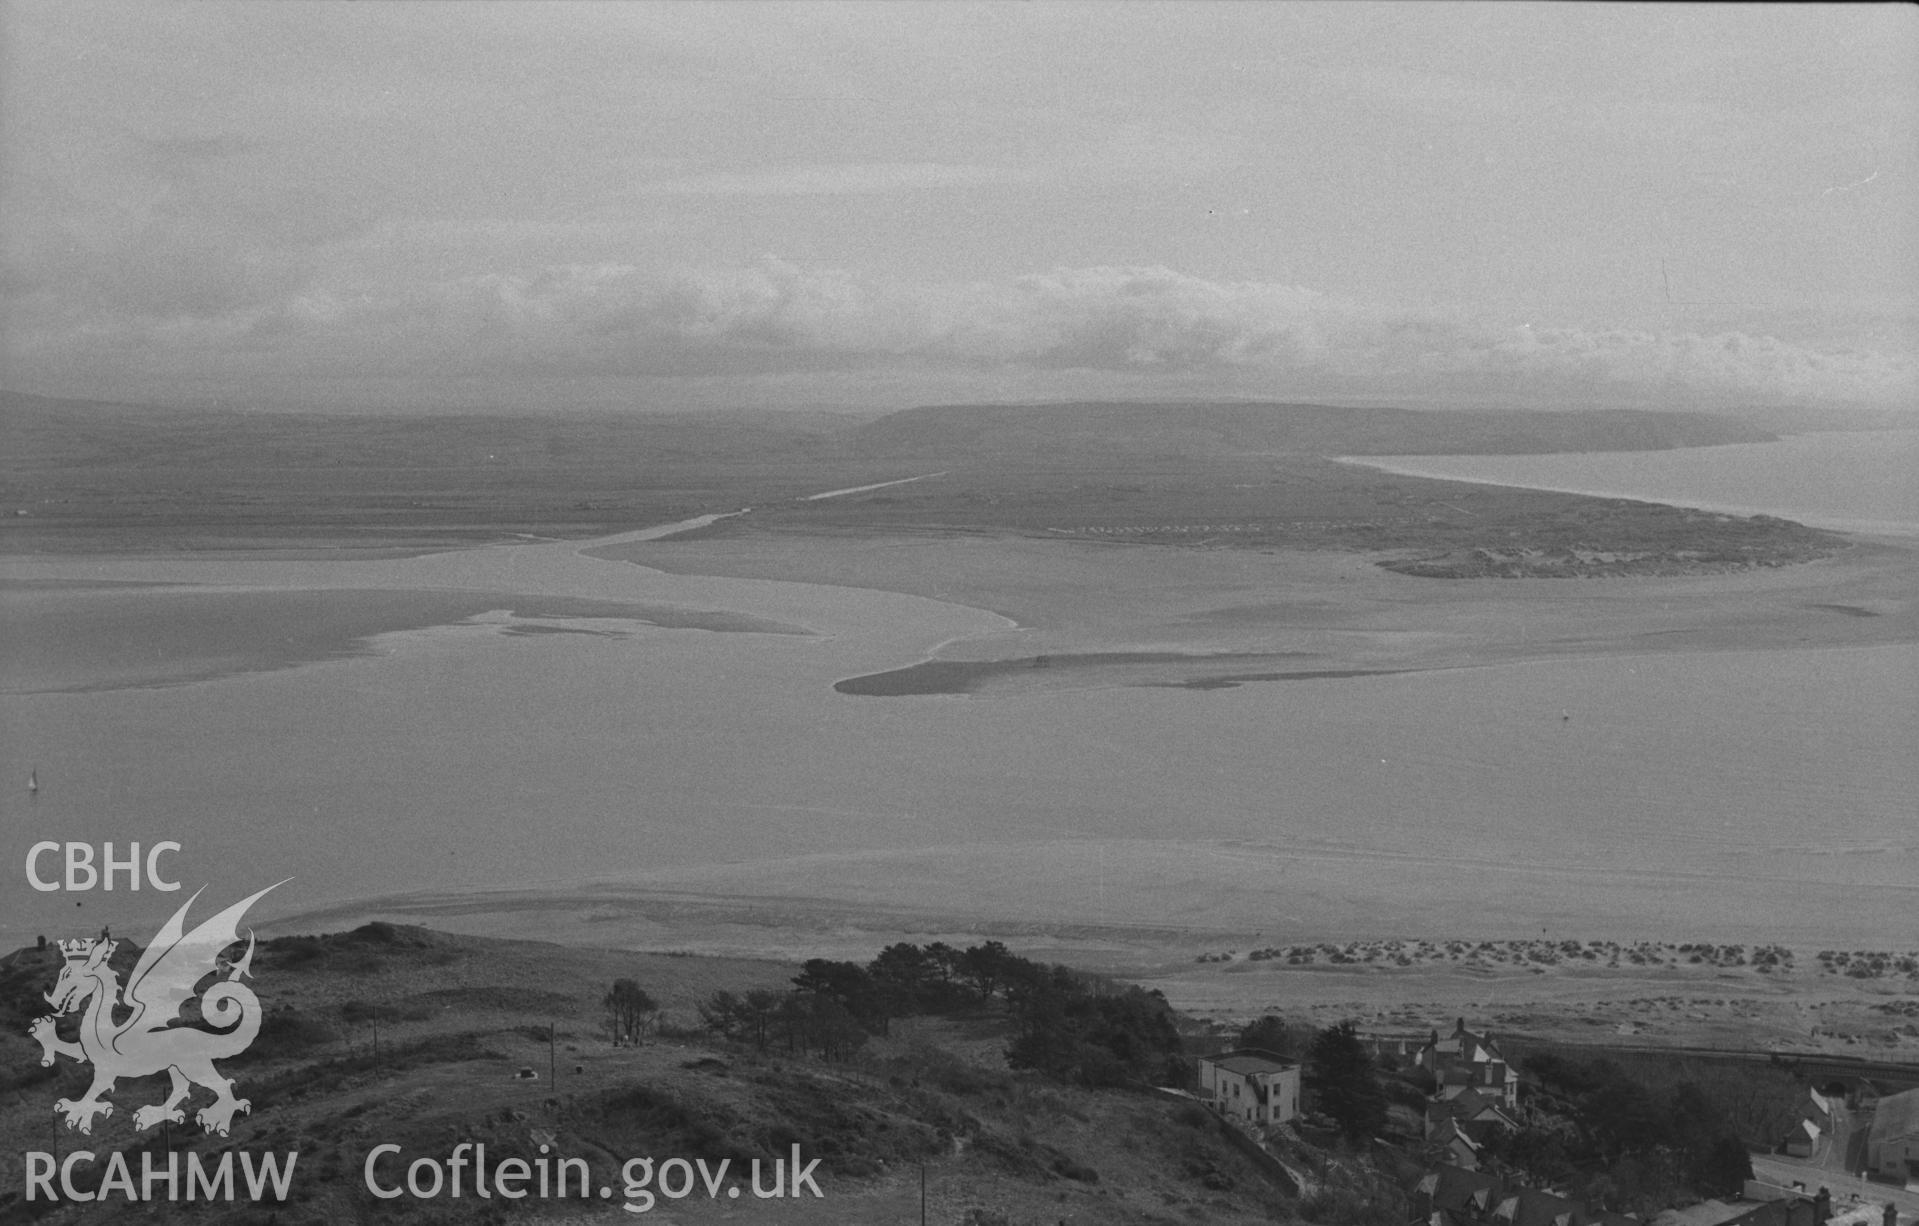 Digital copy of a black and white negative showing view across the Dyfi estuary from above Aberdovey. Photographed in April 1964 by Arthur O. Chater from Grid Reference SN 611 964, looking east - south south west.